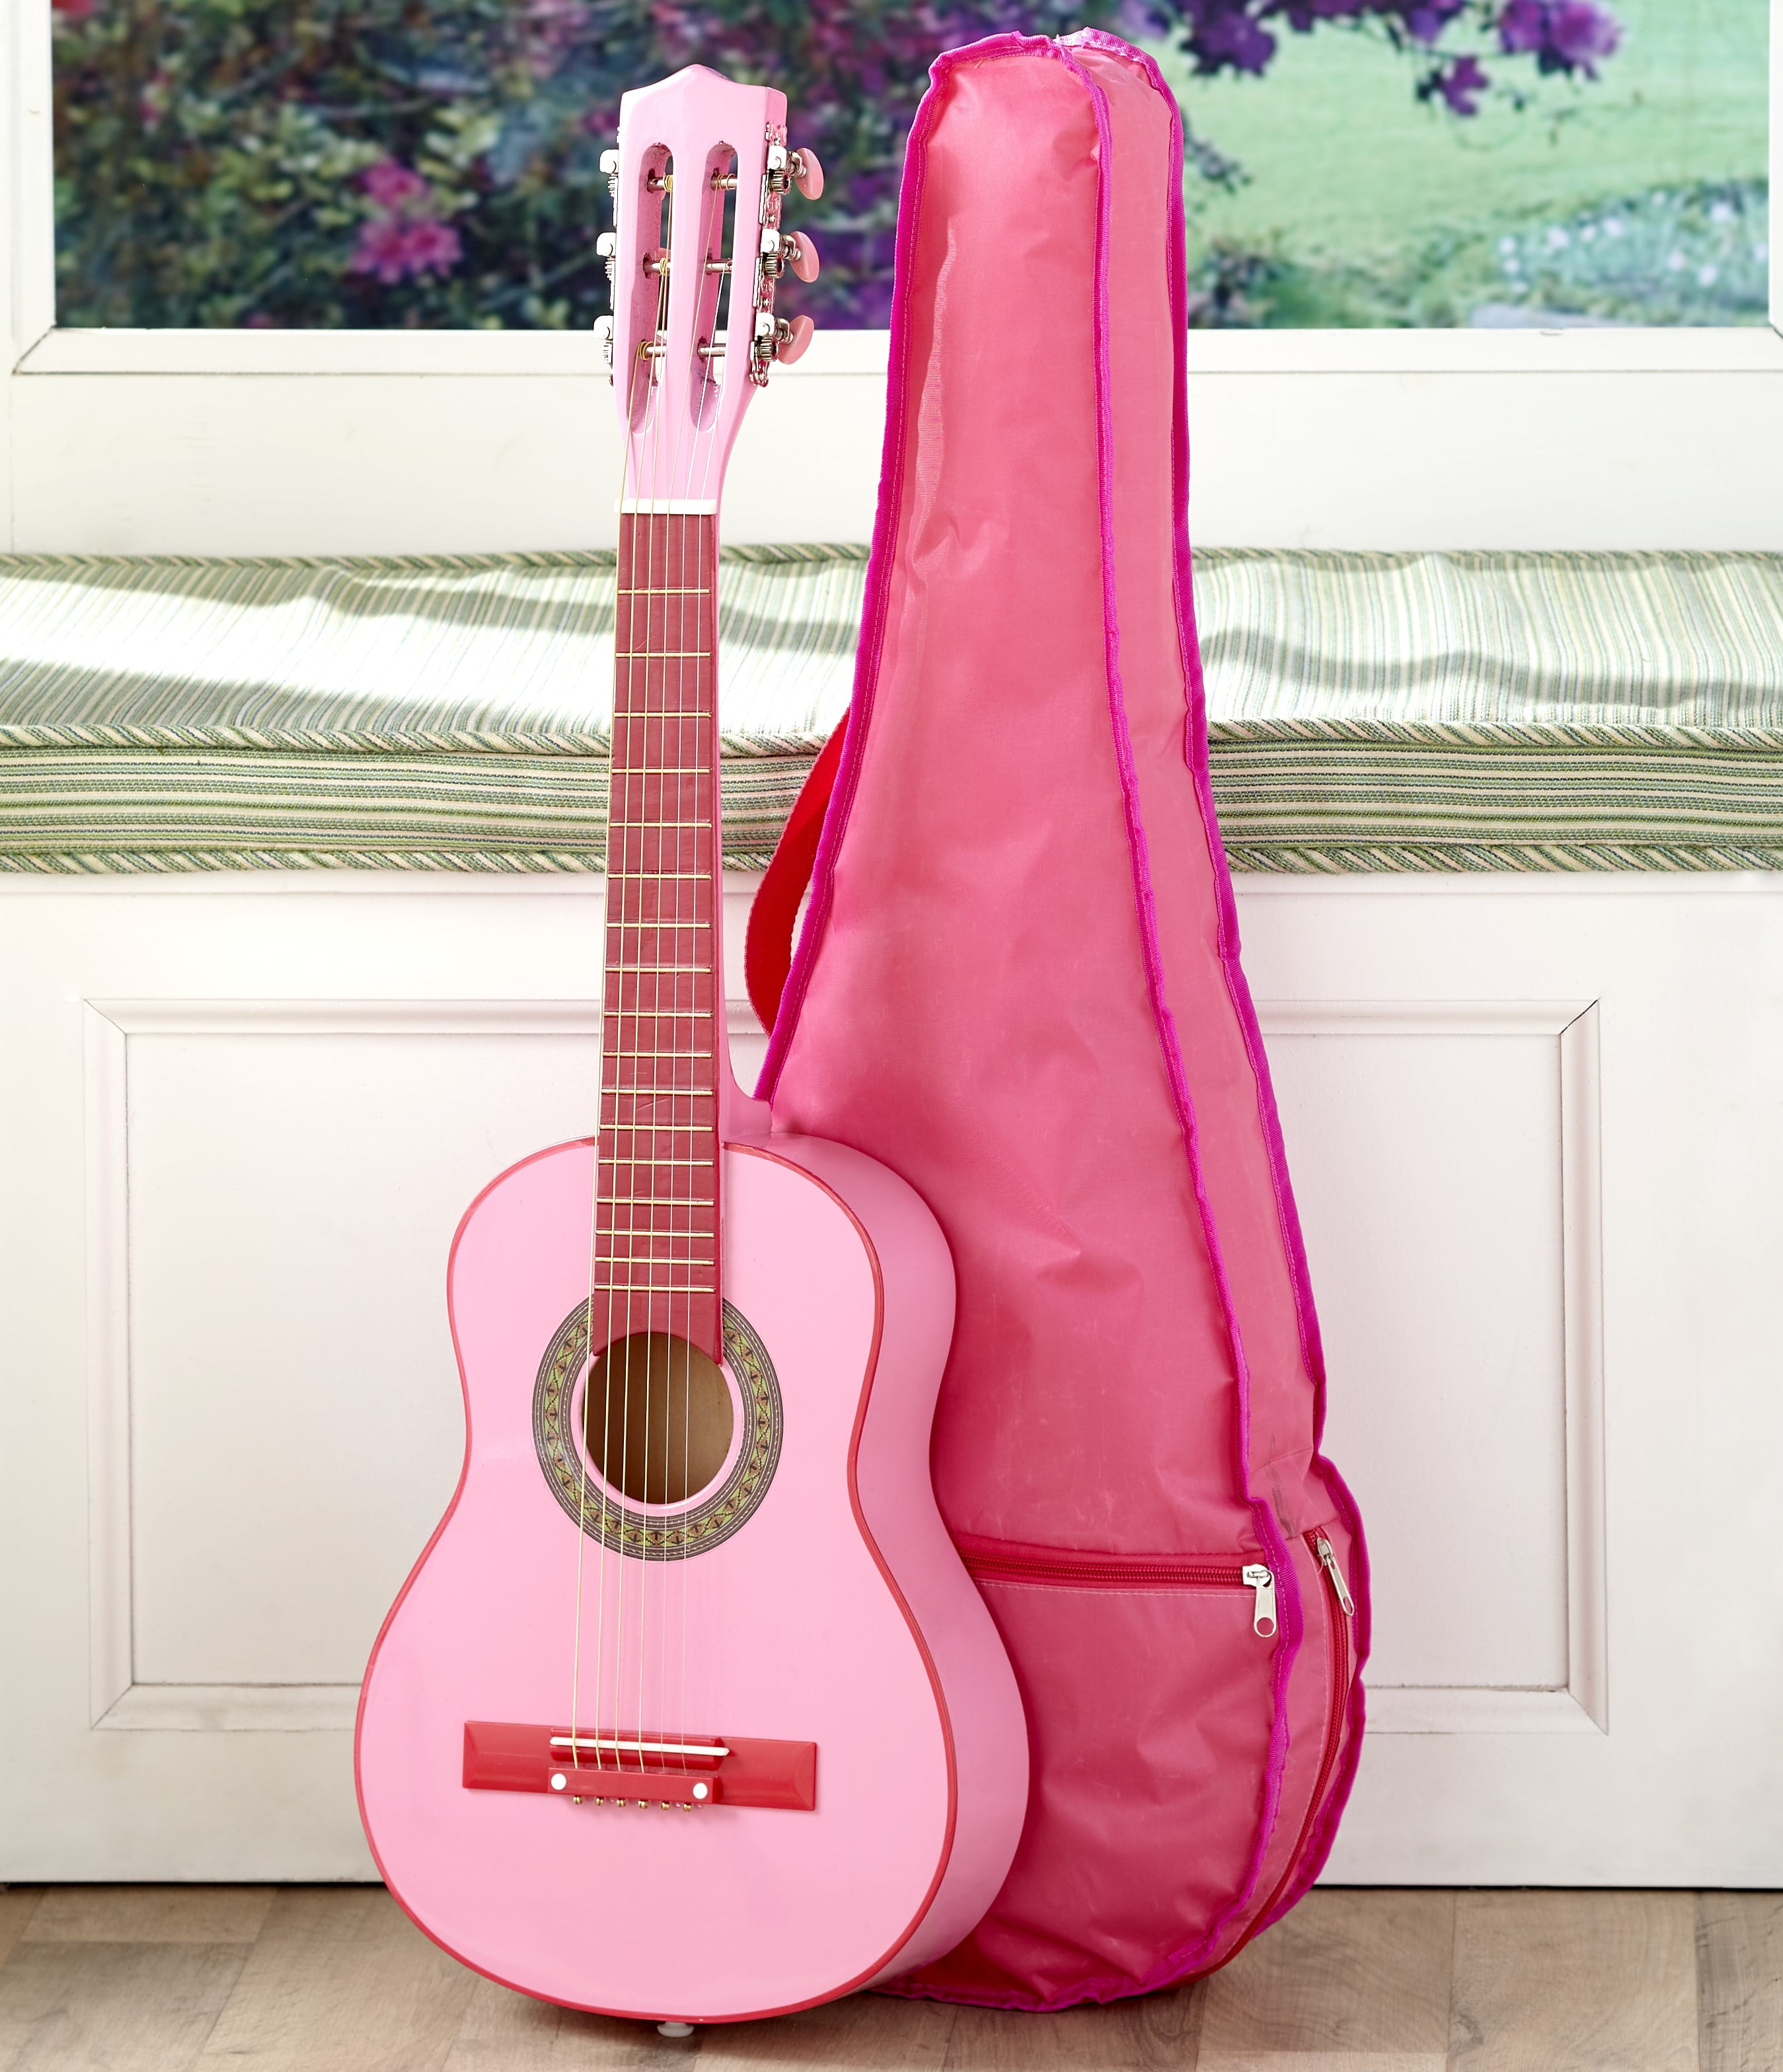 Standard NEW Beginners 30 Pink Wood Guitar with Case and Accessories Great Gift for Kids Girls 